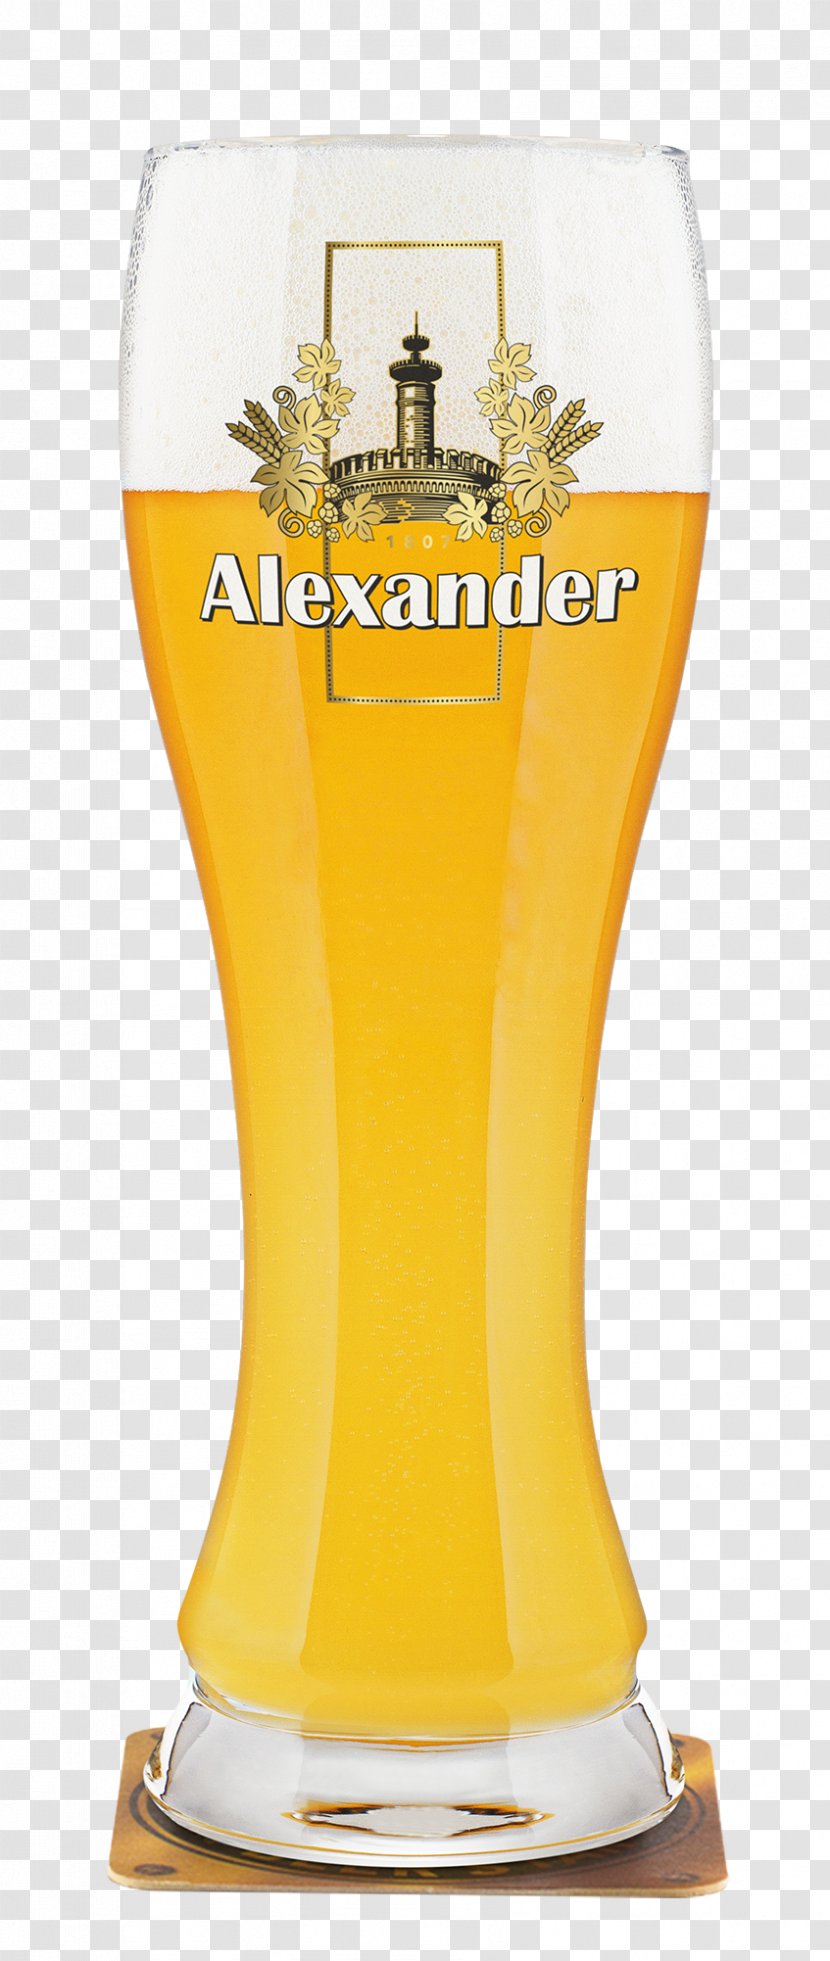 Wheat Beer Glasses Pint Trophy - Glass Transparent PNG